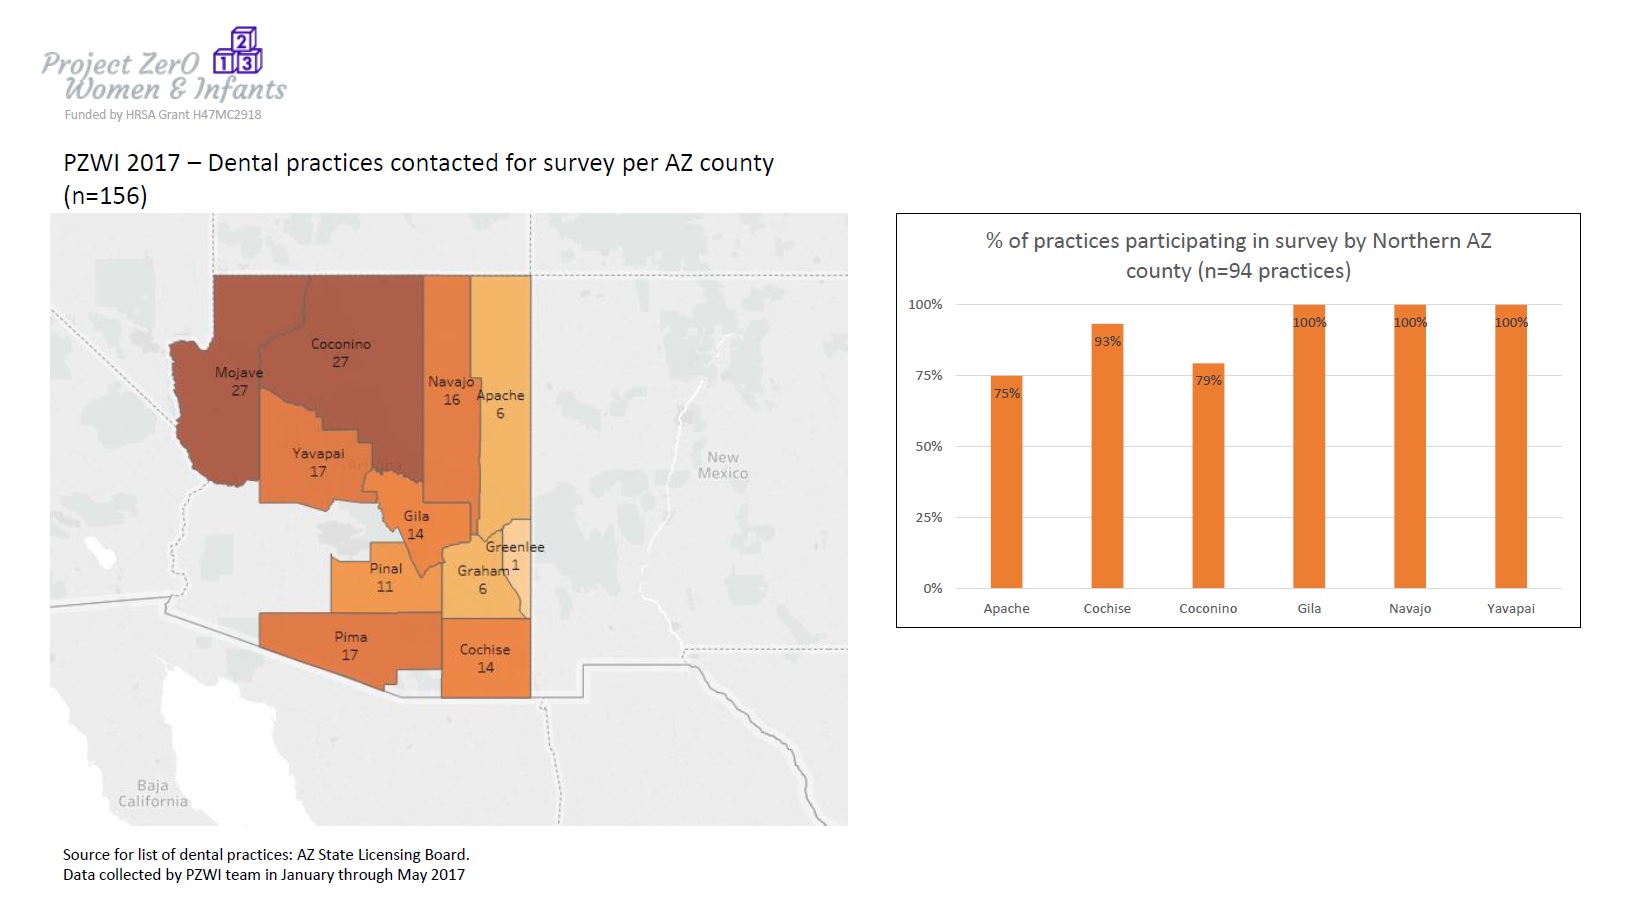 Dental practices contracted for survey per AZ county